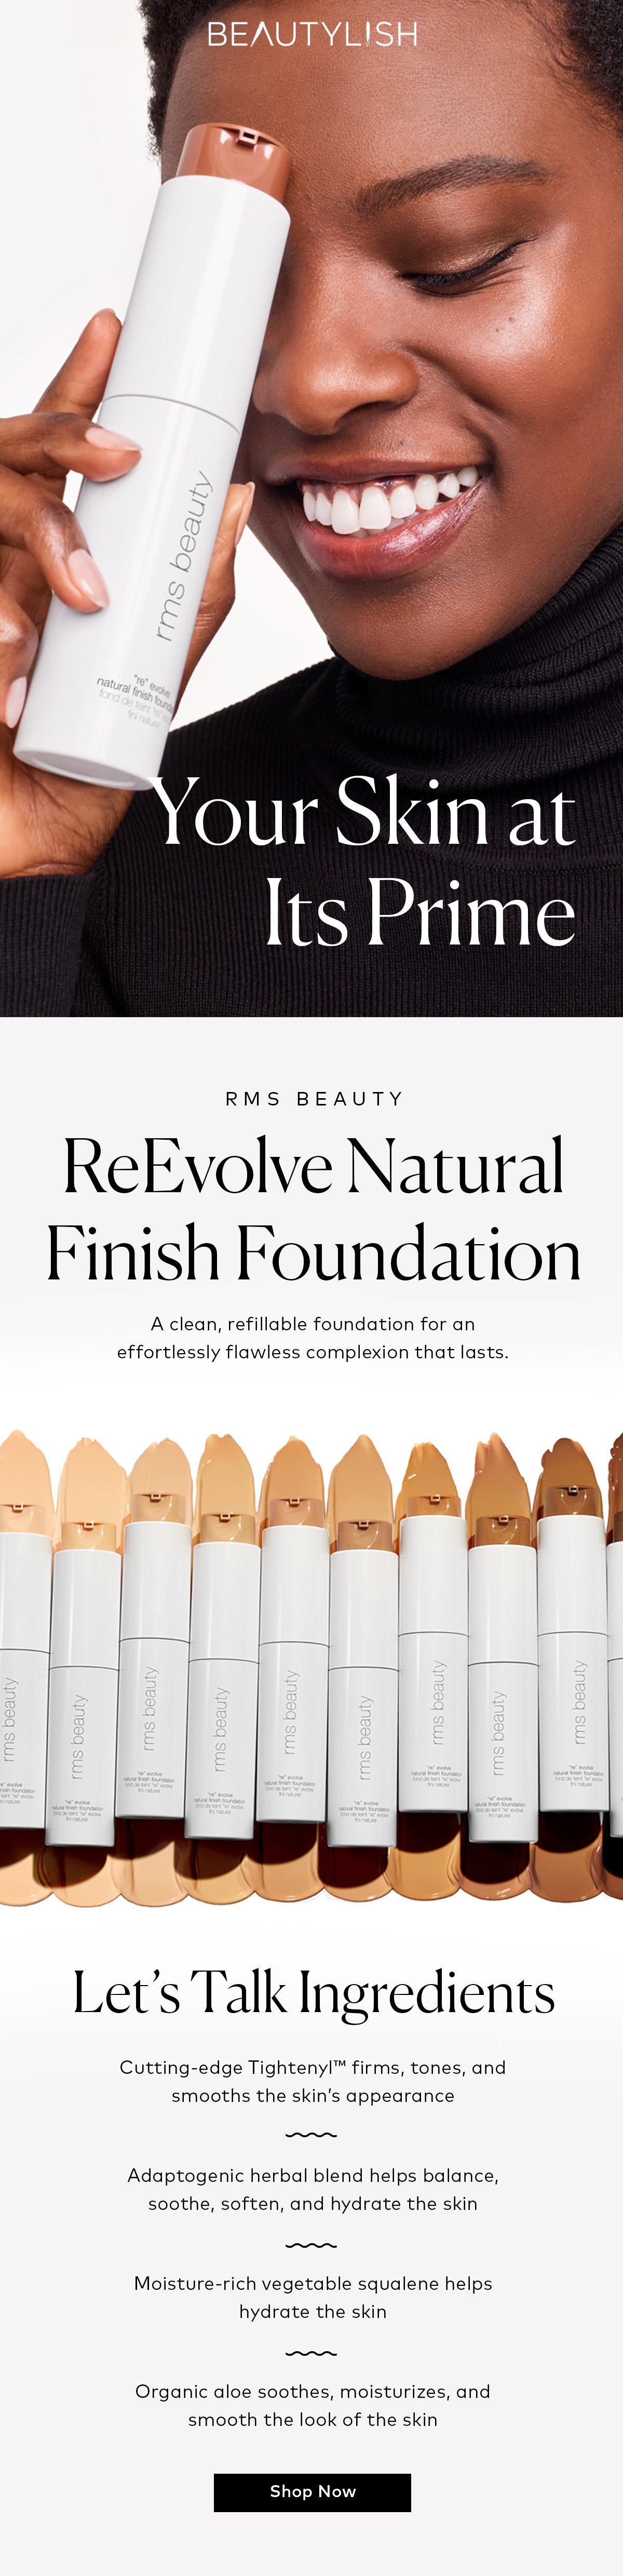 our Skin at Its Prime RMS BEAUTY ReEvolve Natural Finish Foundation A clean, refillable foundation for an effortlessly flawless complexion that lasts. Let's Talk Ingredients Cutting-edge Tightenyl firms, tones, and smooths the skin's appearance - Adaptogenic herbal blend helps balance, soothe, soften, and hydrate the skin Moisture-rich vegetable squalene helps hydrate the skin Organic aloe soothes, moisturizes, and smooth the look of the skin Shop Now 